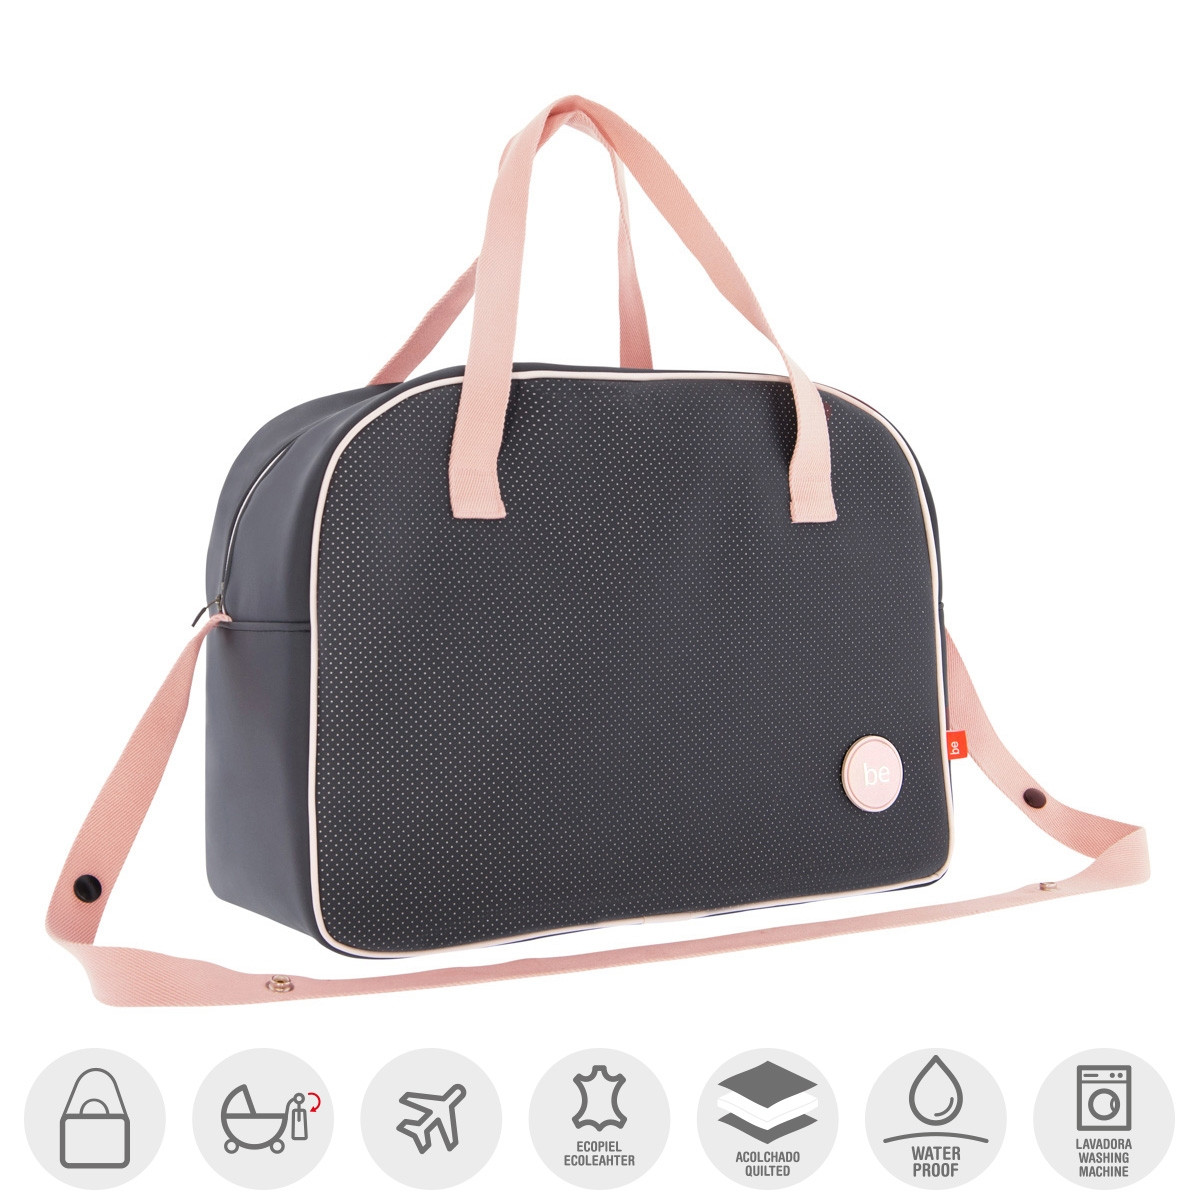 MATERNITY BAG PROME URBANY PINK 18x44x33 CM CAMBRASS - 1